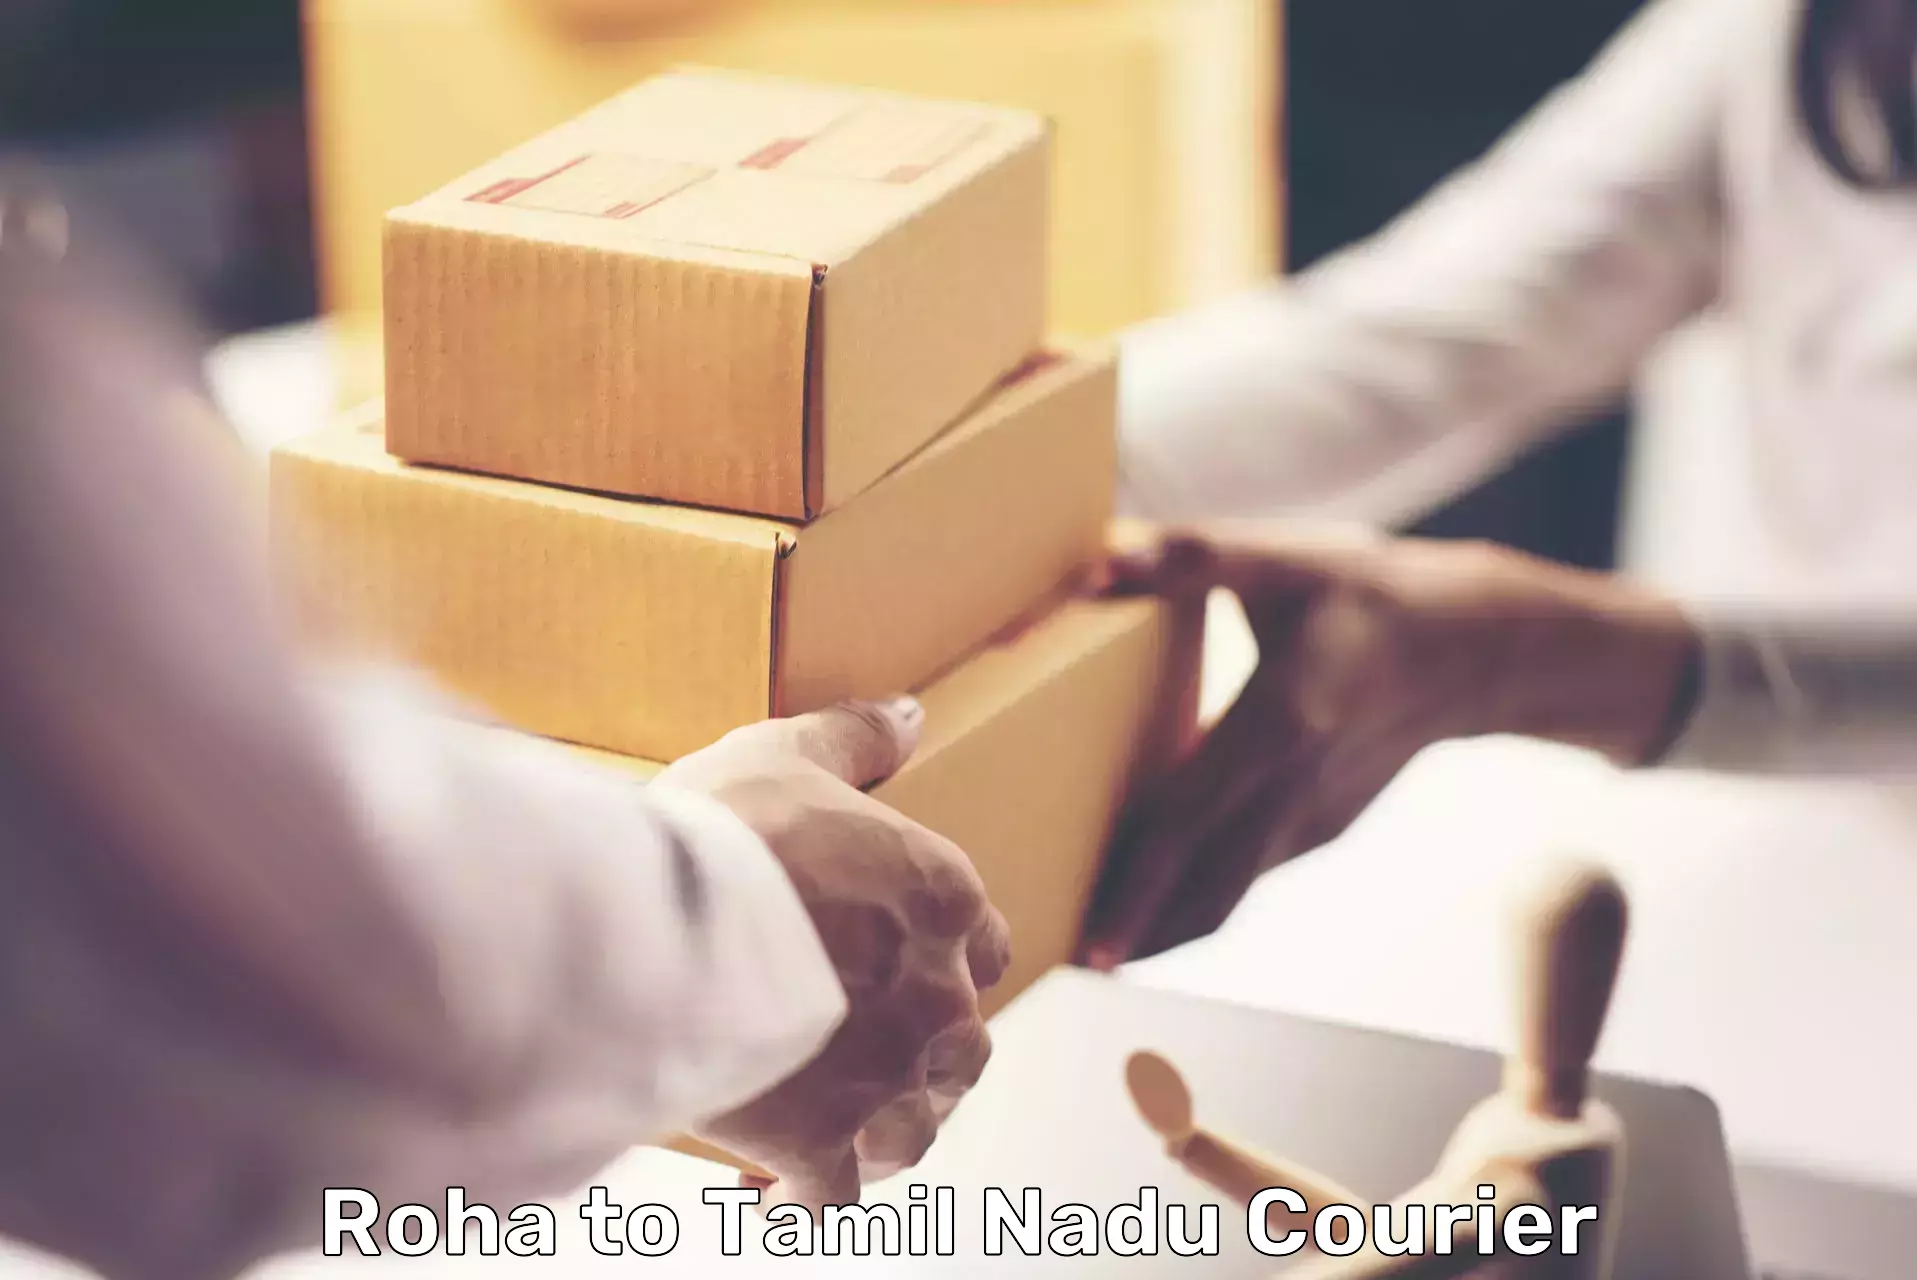 Reliable delivery network Roha to Saveetha Institute of Medical and Technical Sciences Chennai